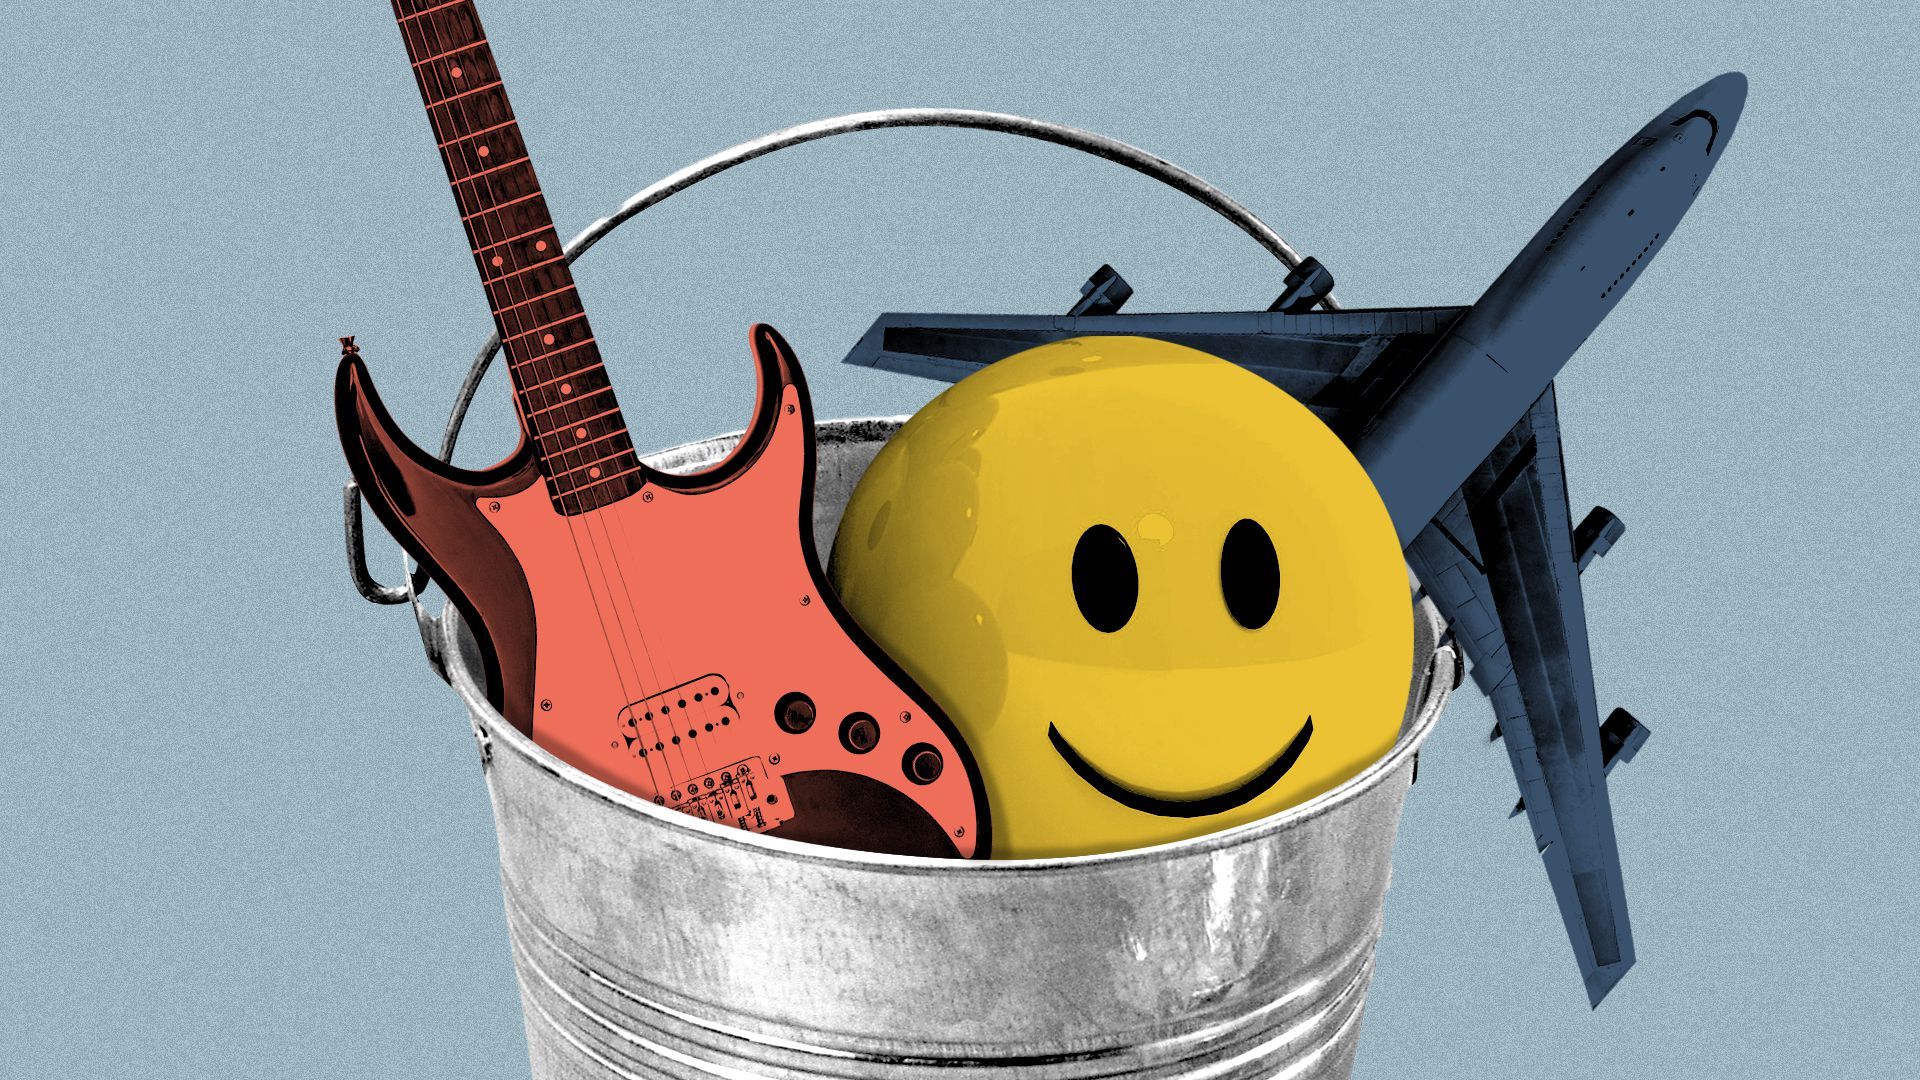 Illustration of a bucket filled with an airplane, a guitar, and a smiley-face ball.